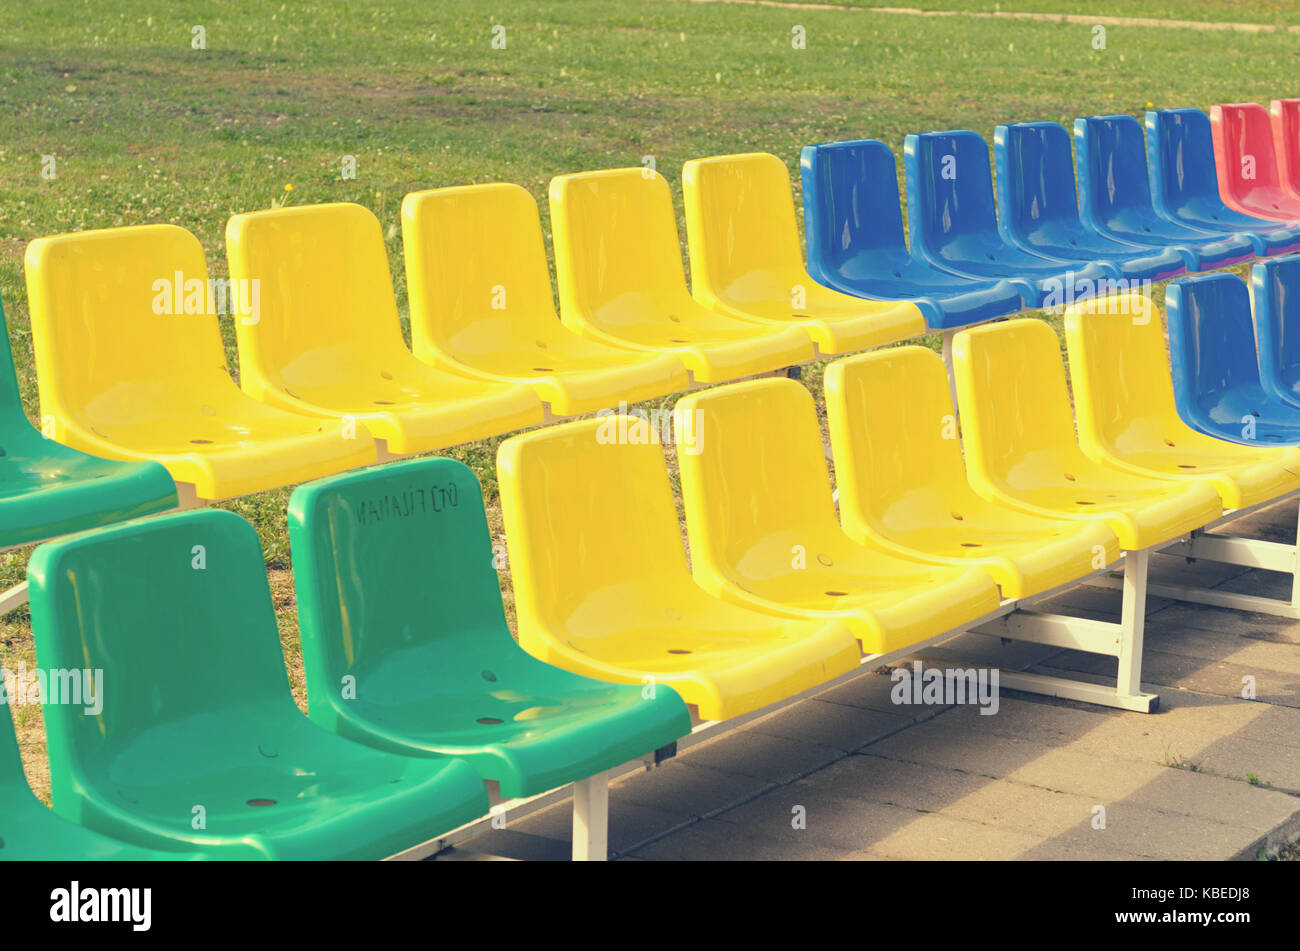 Multicolored benches for sports fans standing in two rows Stock Photo